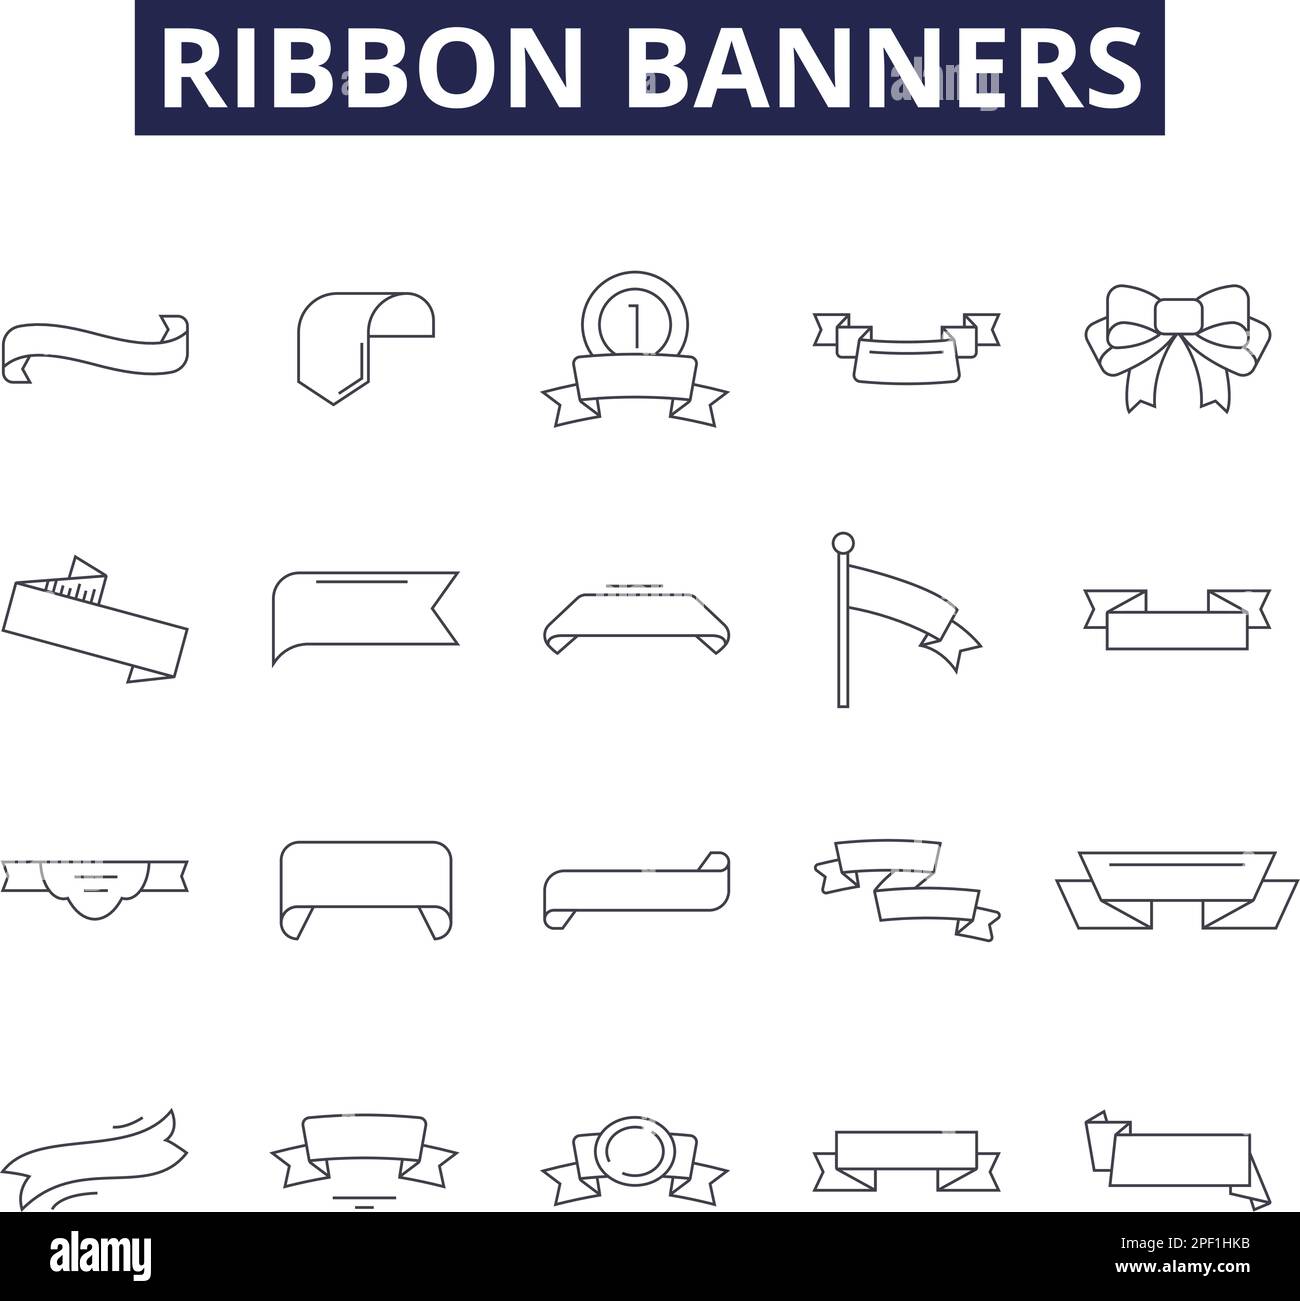 Ribbon banners line vector icons and signs. Banners, Bunting, Streamers, Trims, Flags, Strings, Swags, Rosettes outline vector illustration set Stock Vector